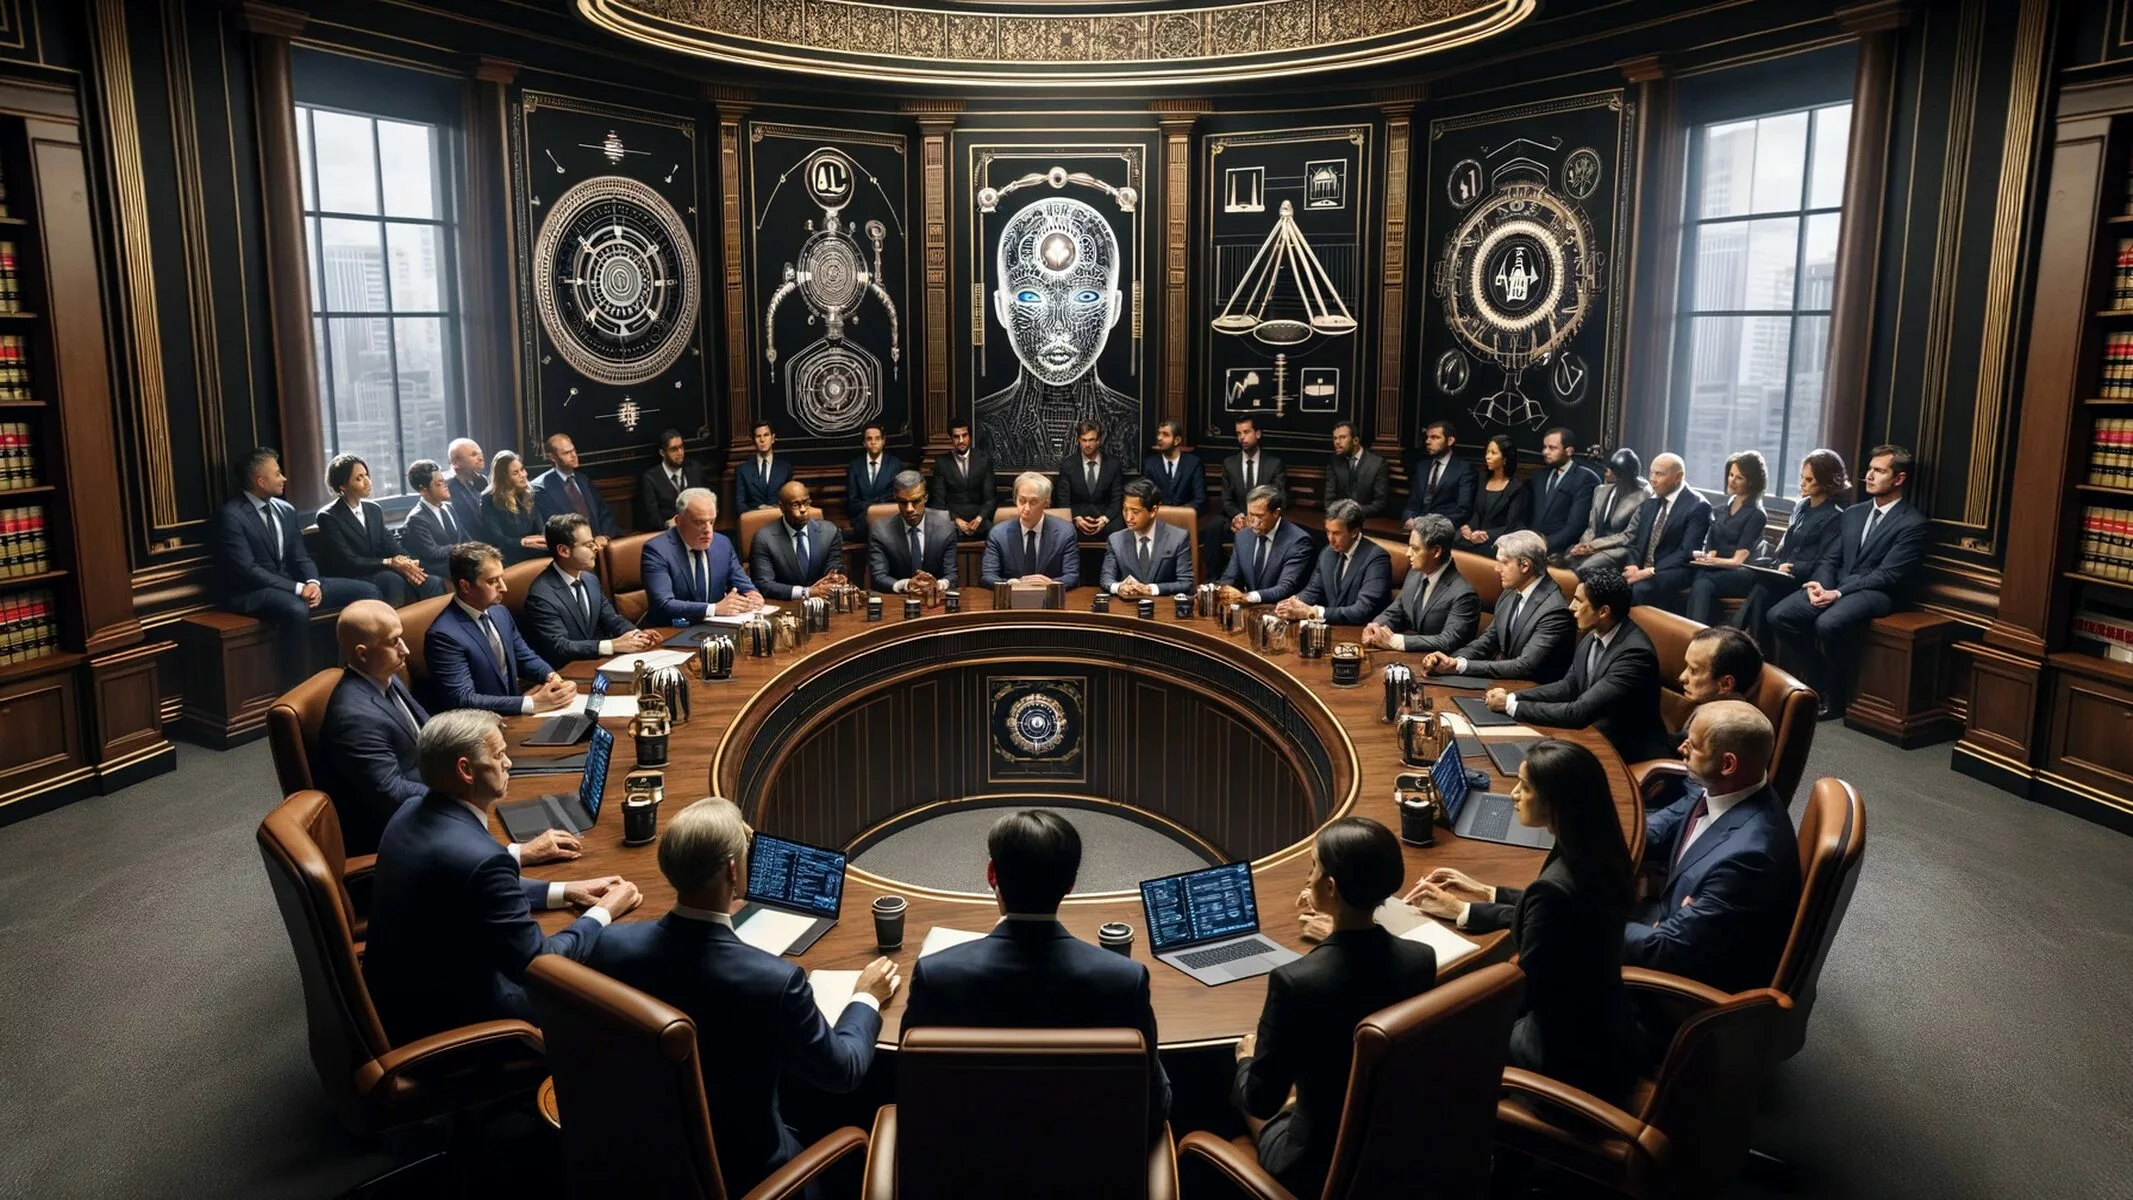 A group of lawmakers from diverse backgrounds and descents, in a formal meeting room, engaged in a serious discussion about regulating AI development